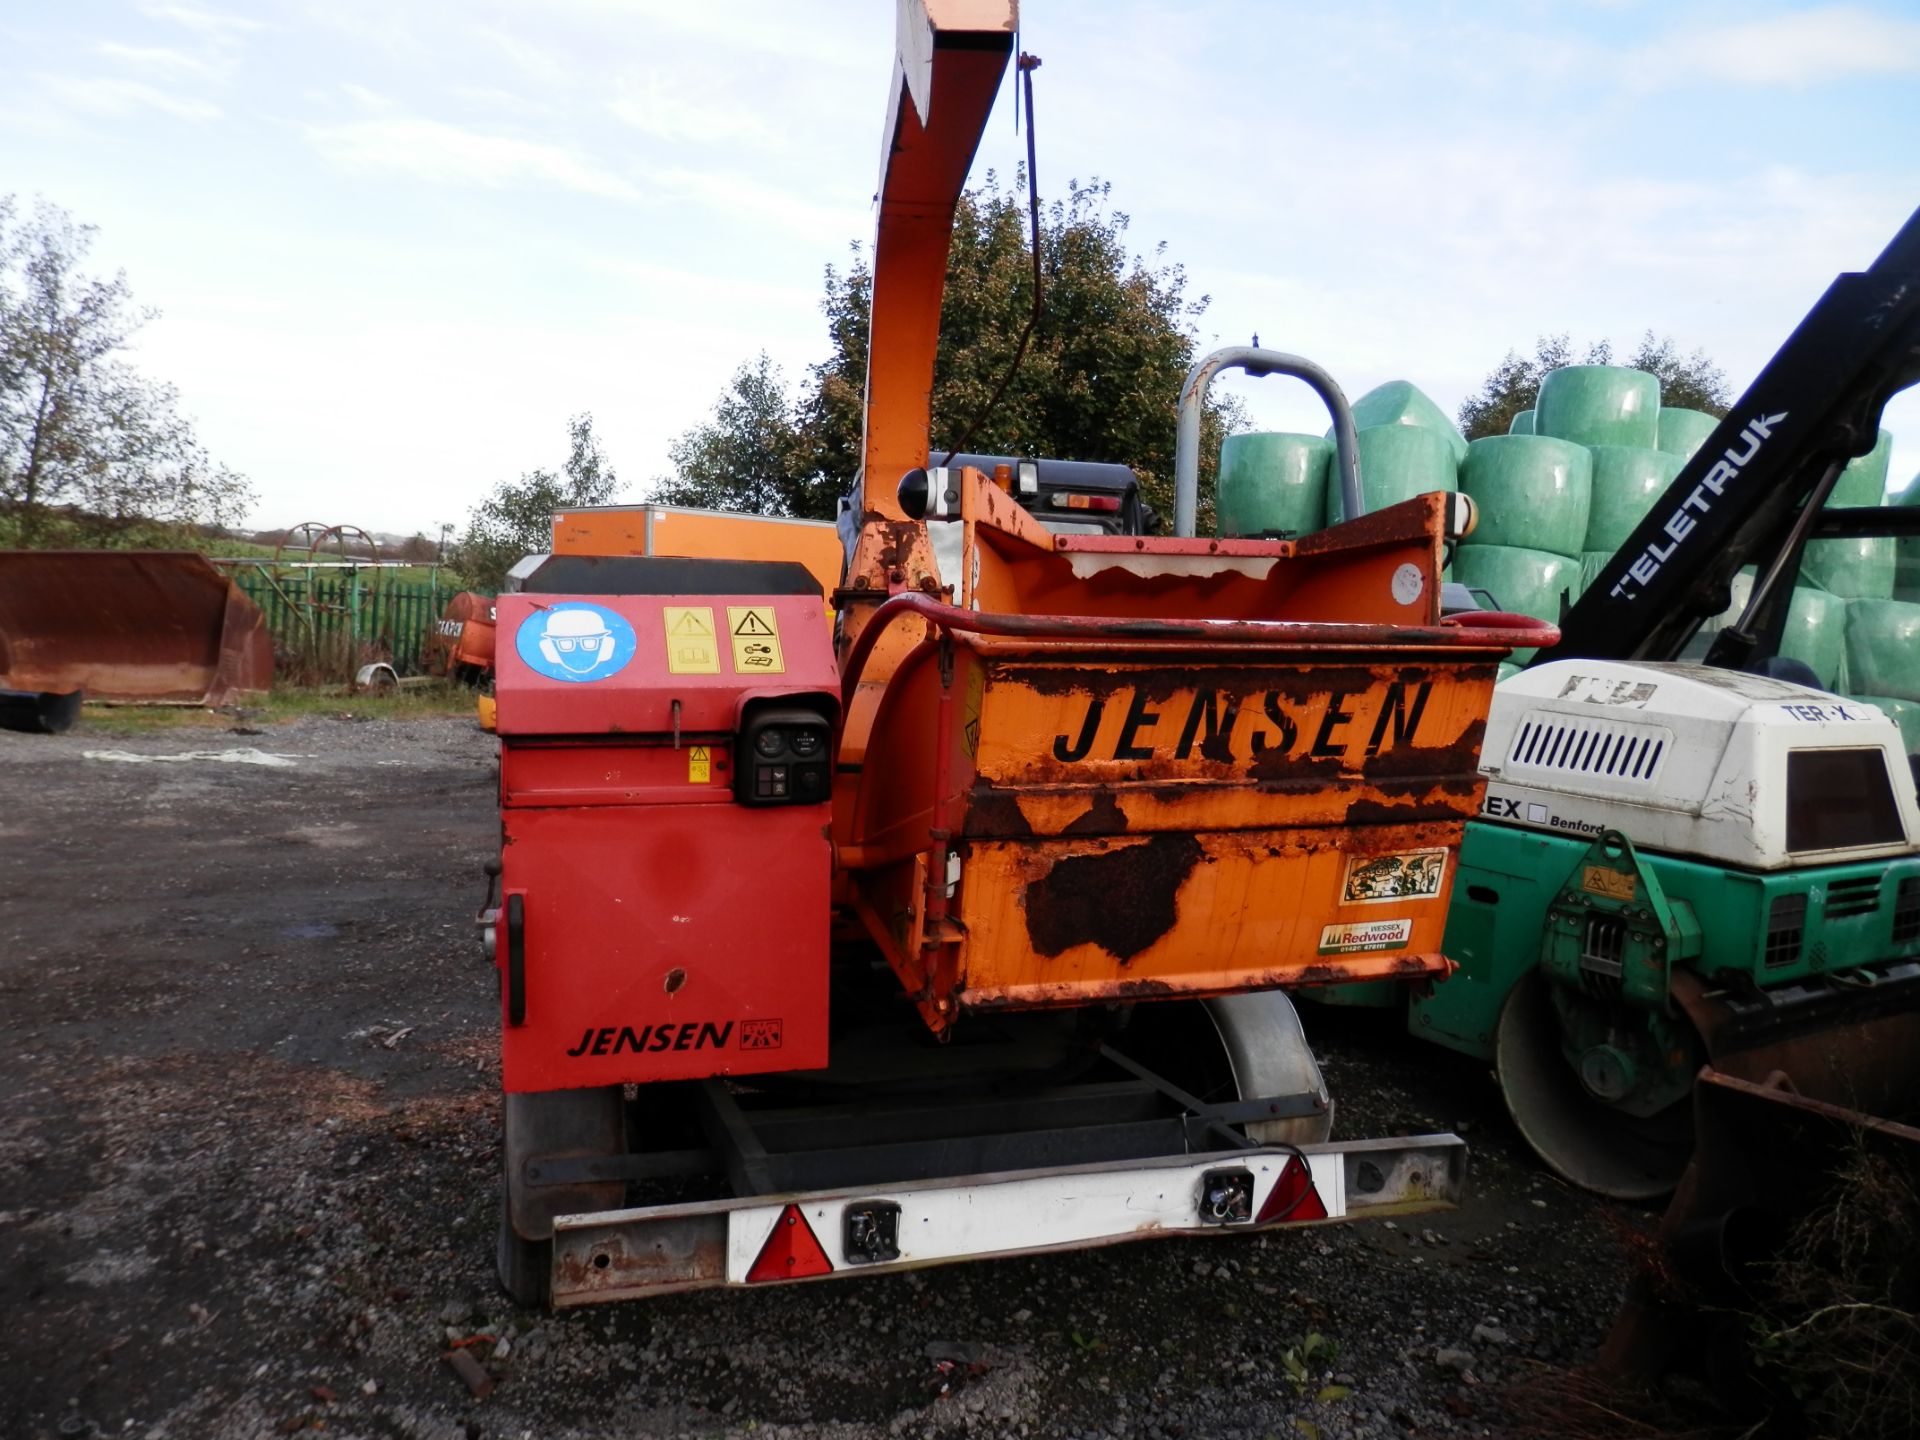 DS - QUALITY 2004 JENSEN DIESEL TURNTABLE CHIPPER, GOOD WORKING ORDER   GOOD WORKING QUALITY TRAILER - Image 8 of 8